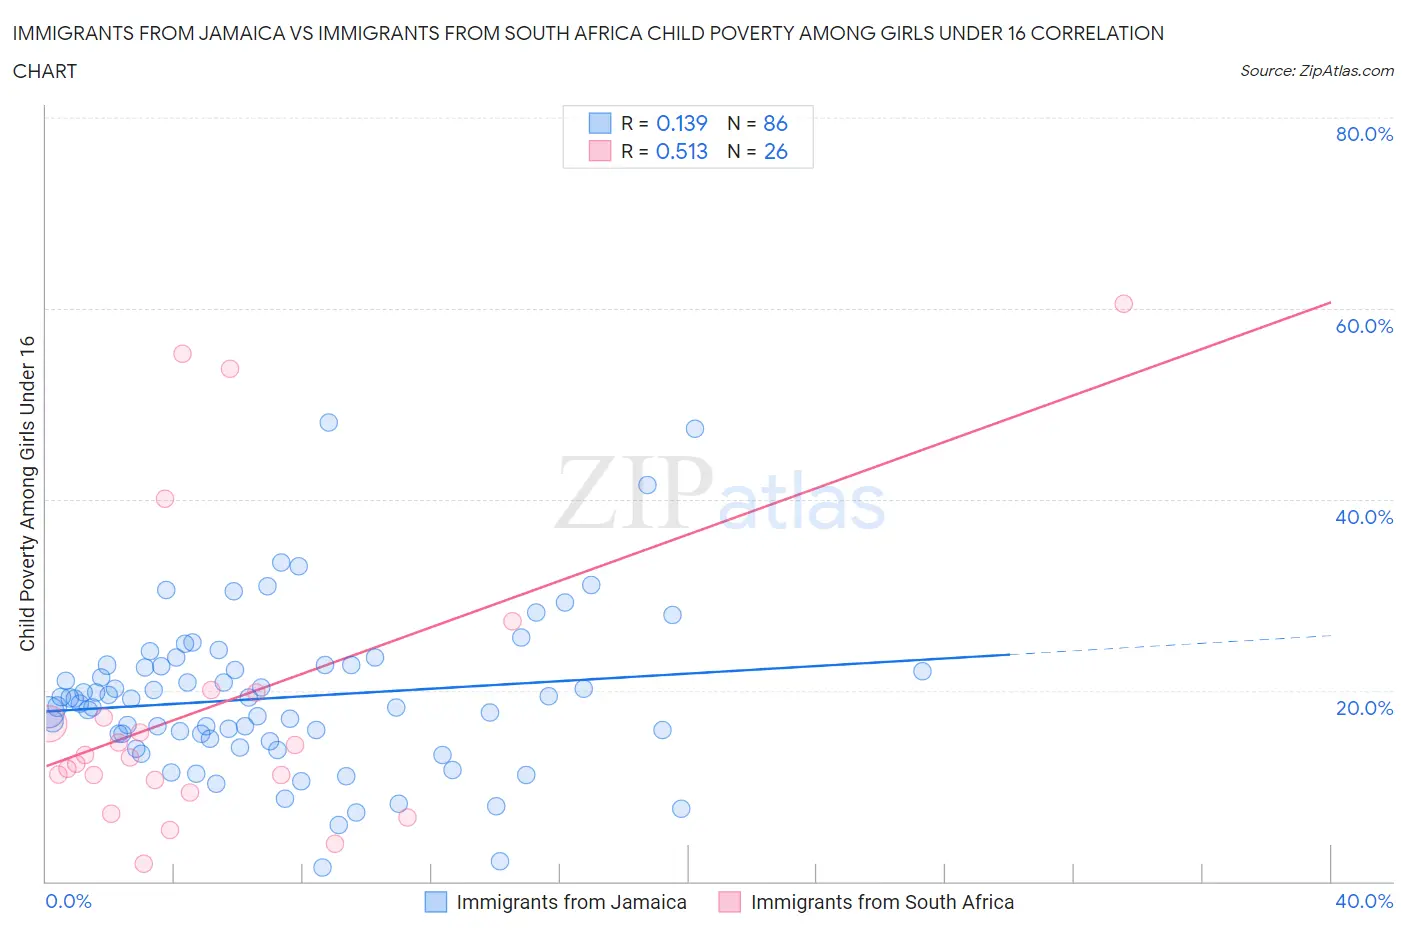 Immigrants from Jamaica vs Immigrants from South Africa Child Poverty Among Girls Under 16